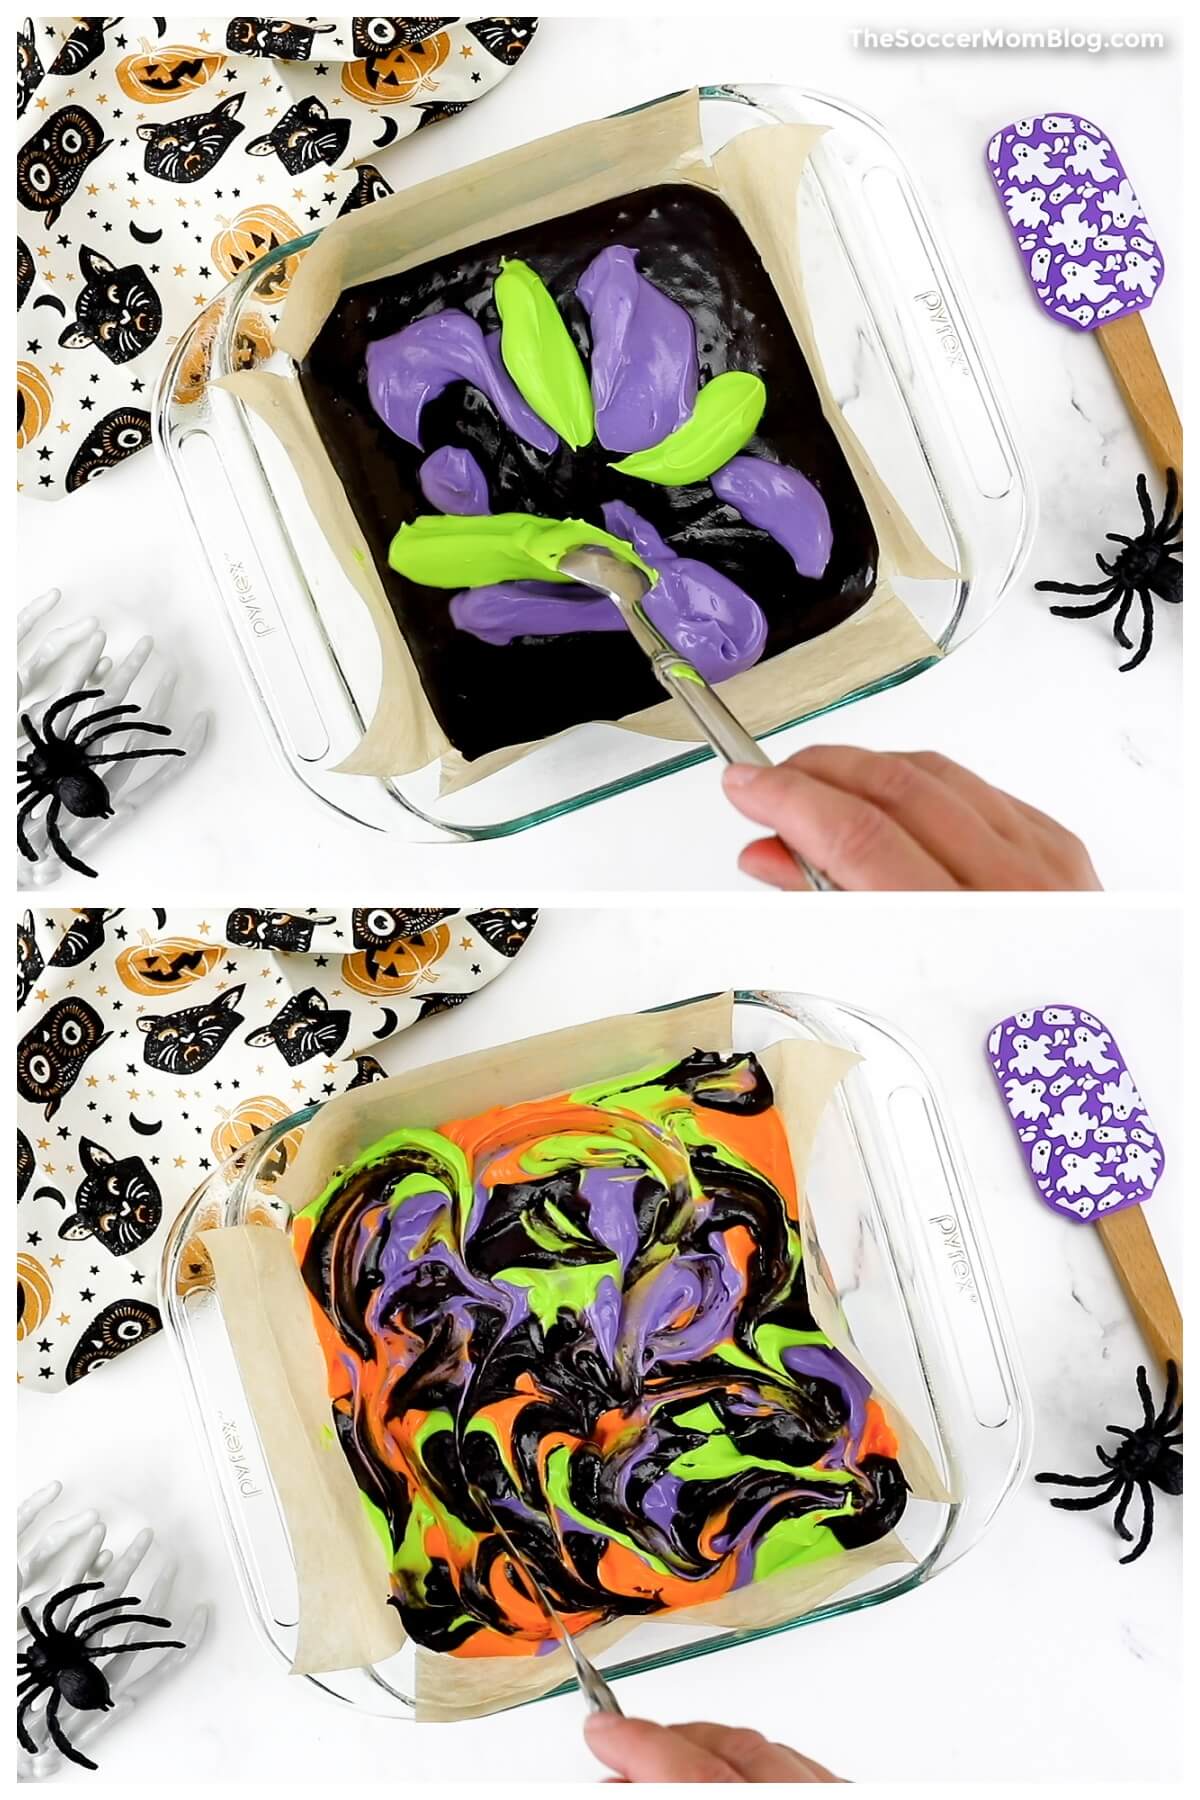 2 photo collage showing how to swirl colorful cheesecake batter into Halloween themed brownies.